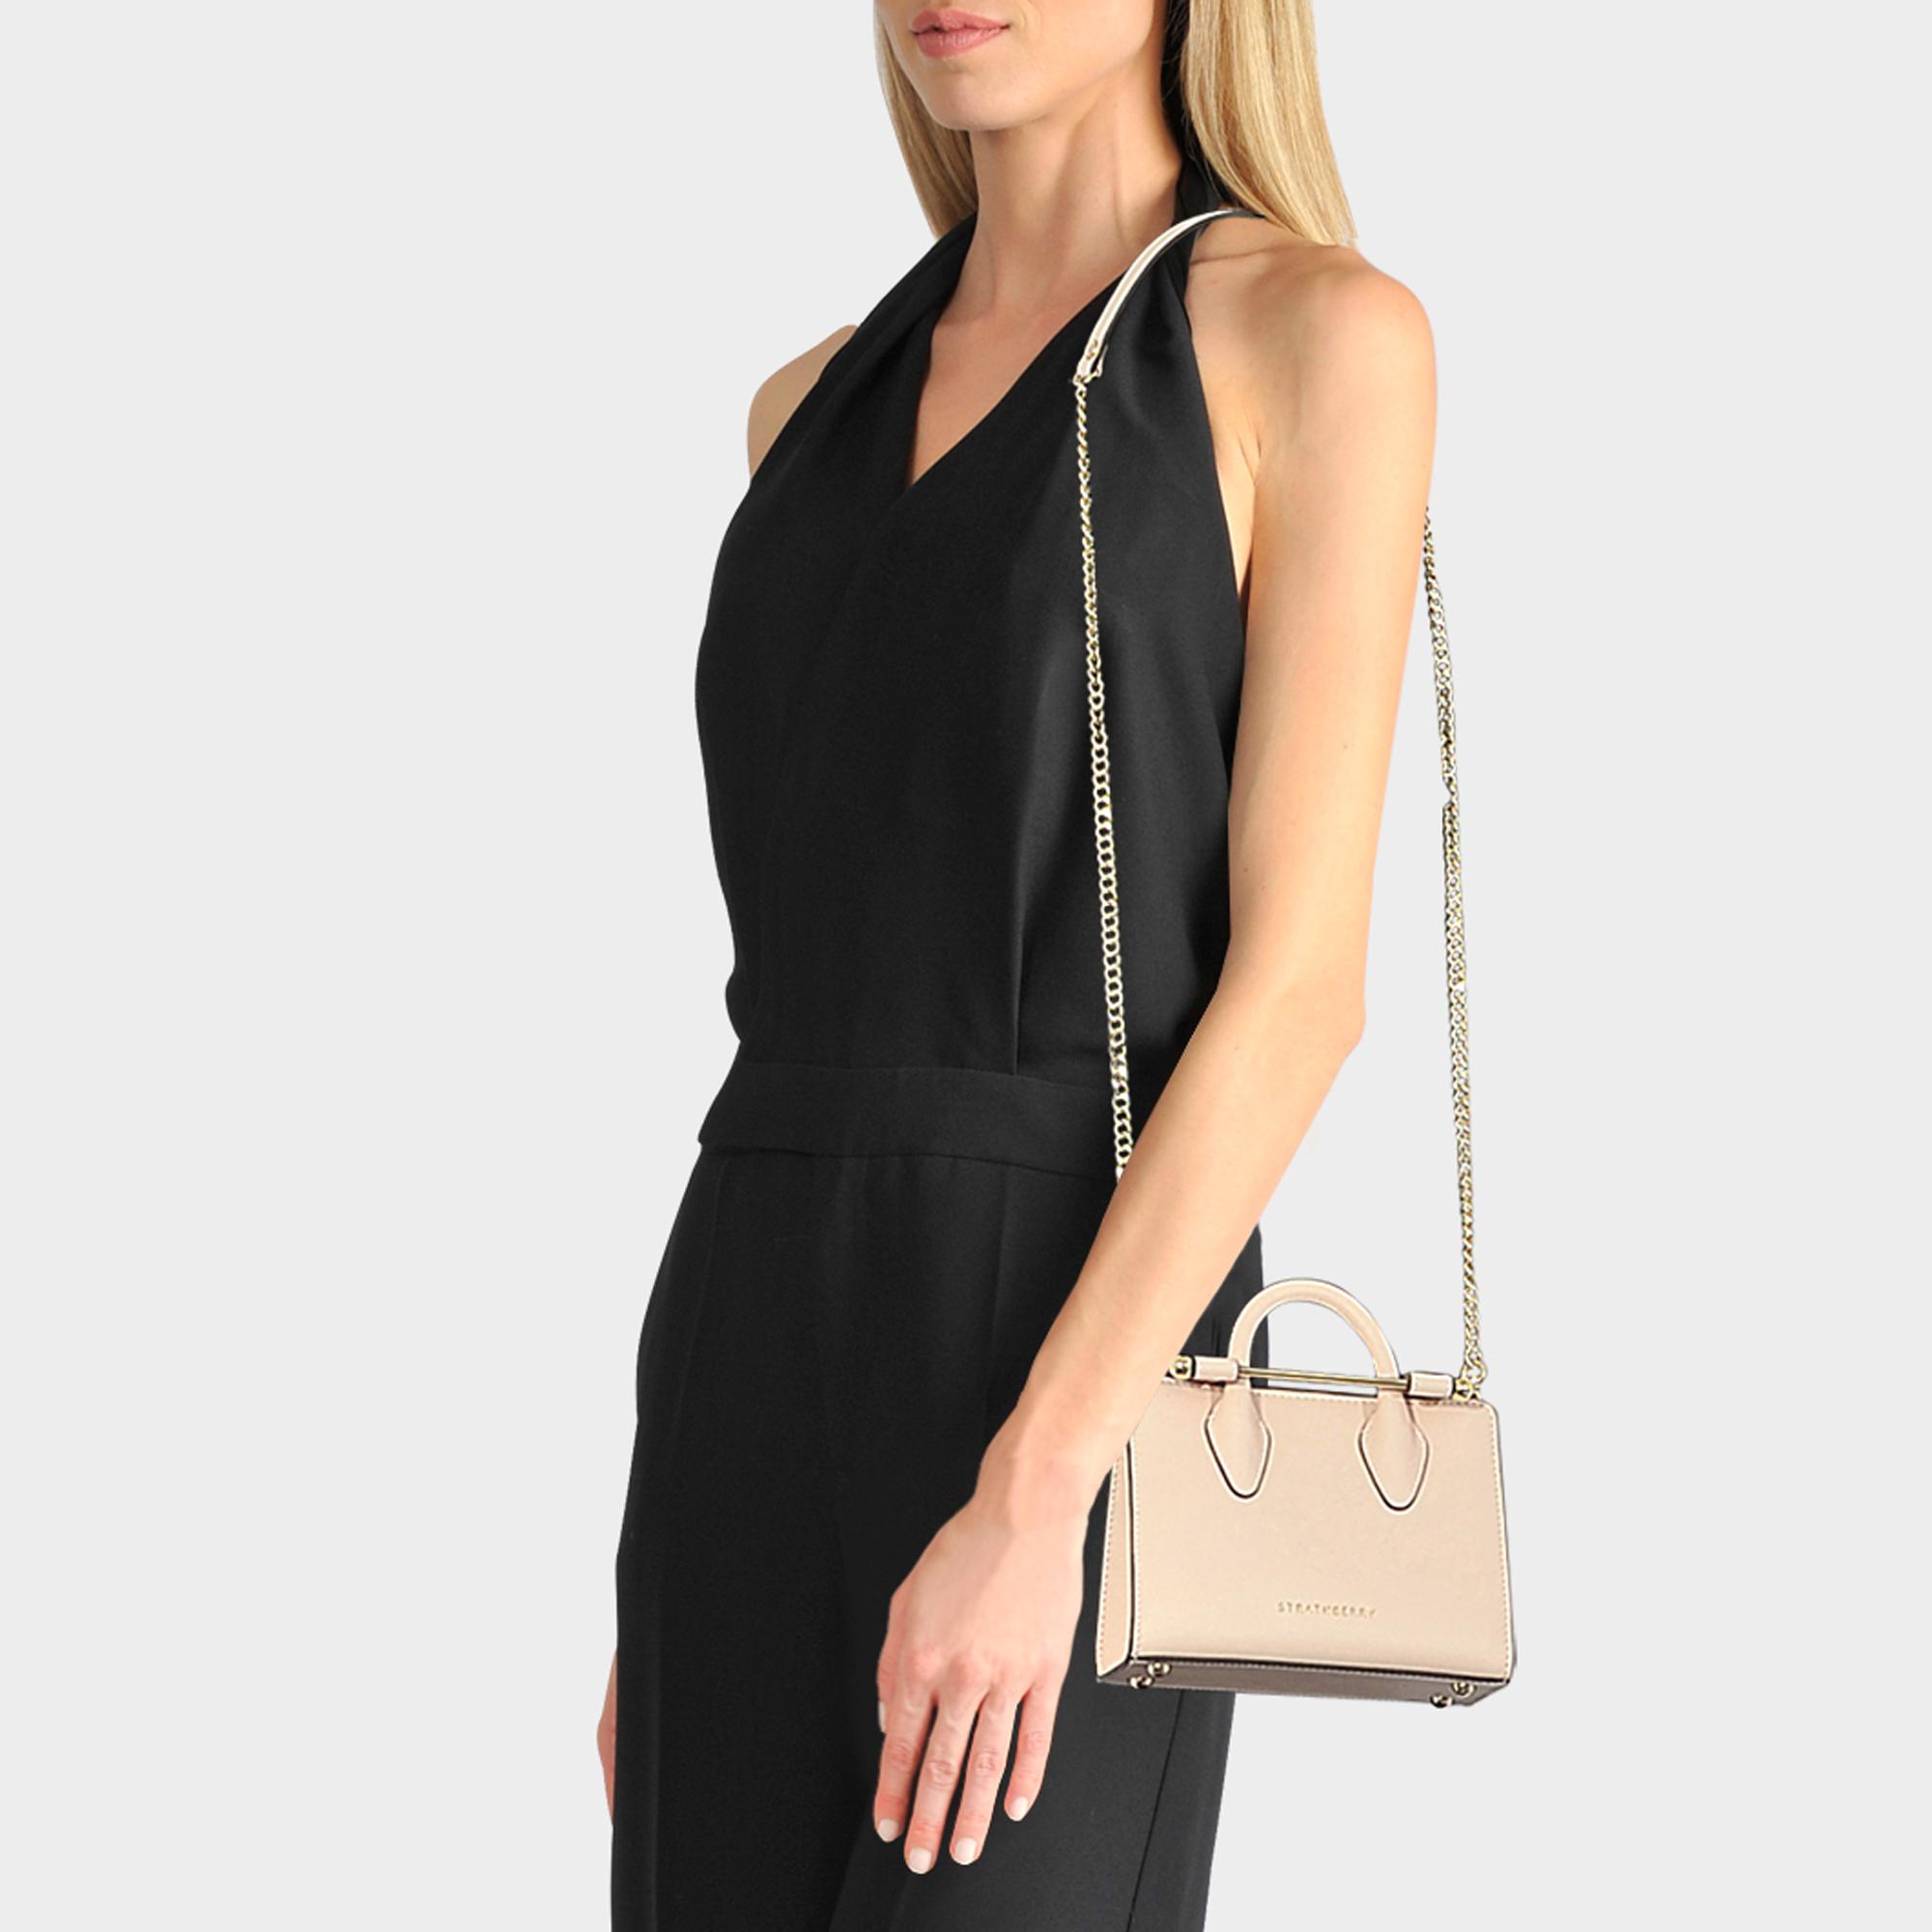 Women's 'nano Tote' Leather Bag by Strathberry